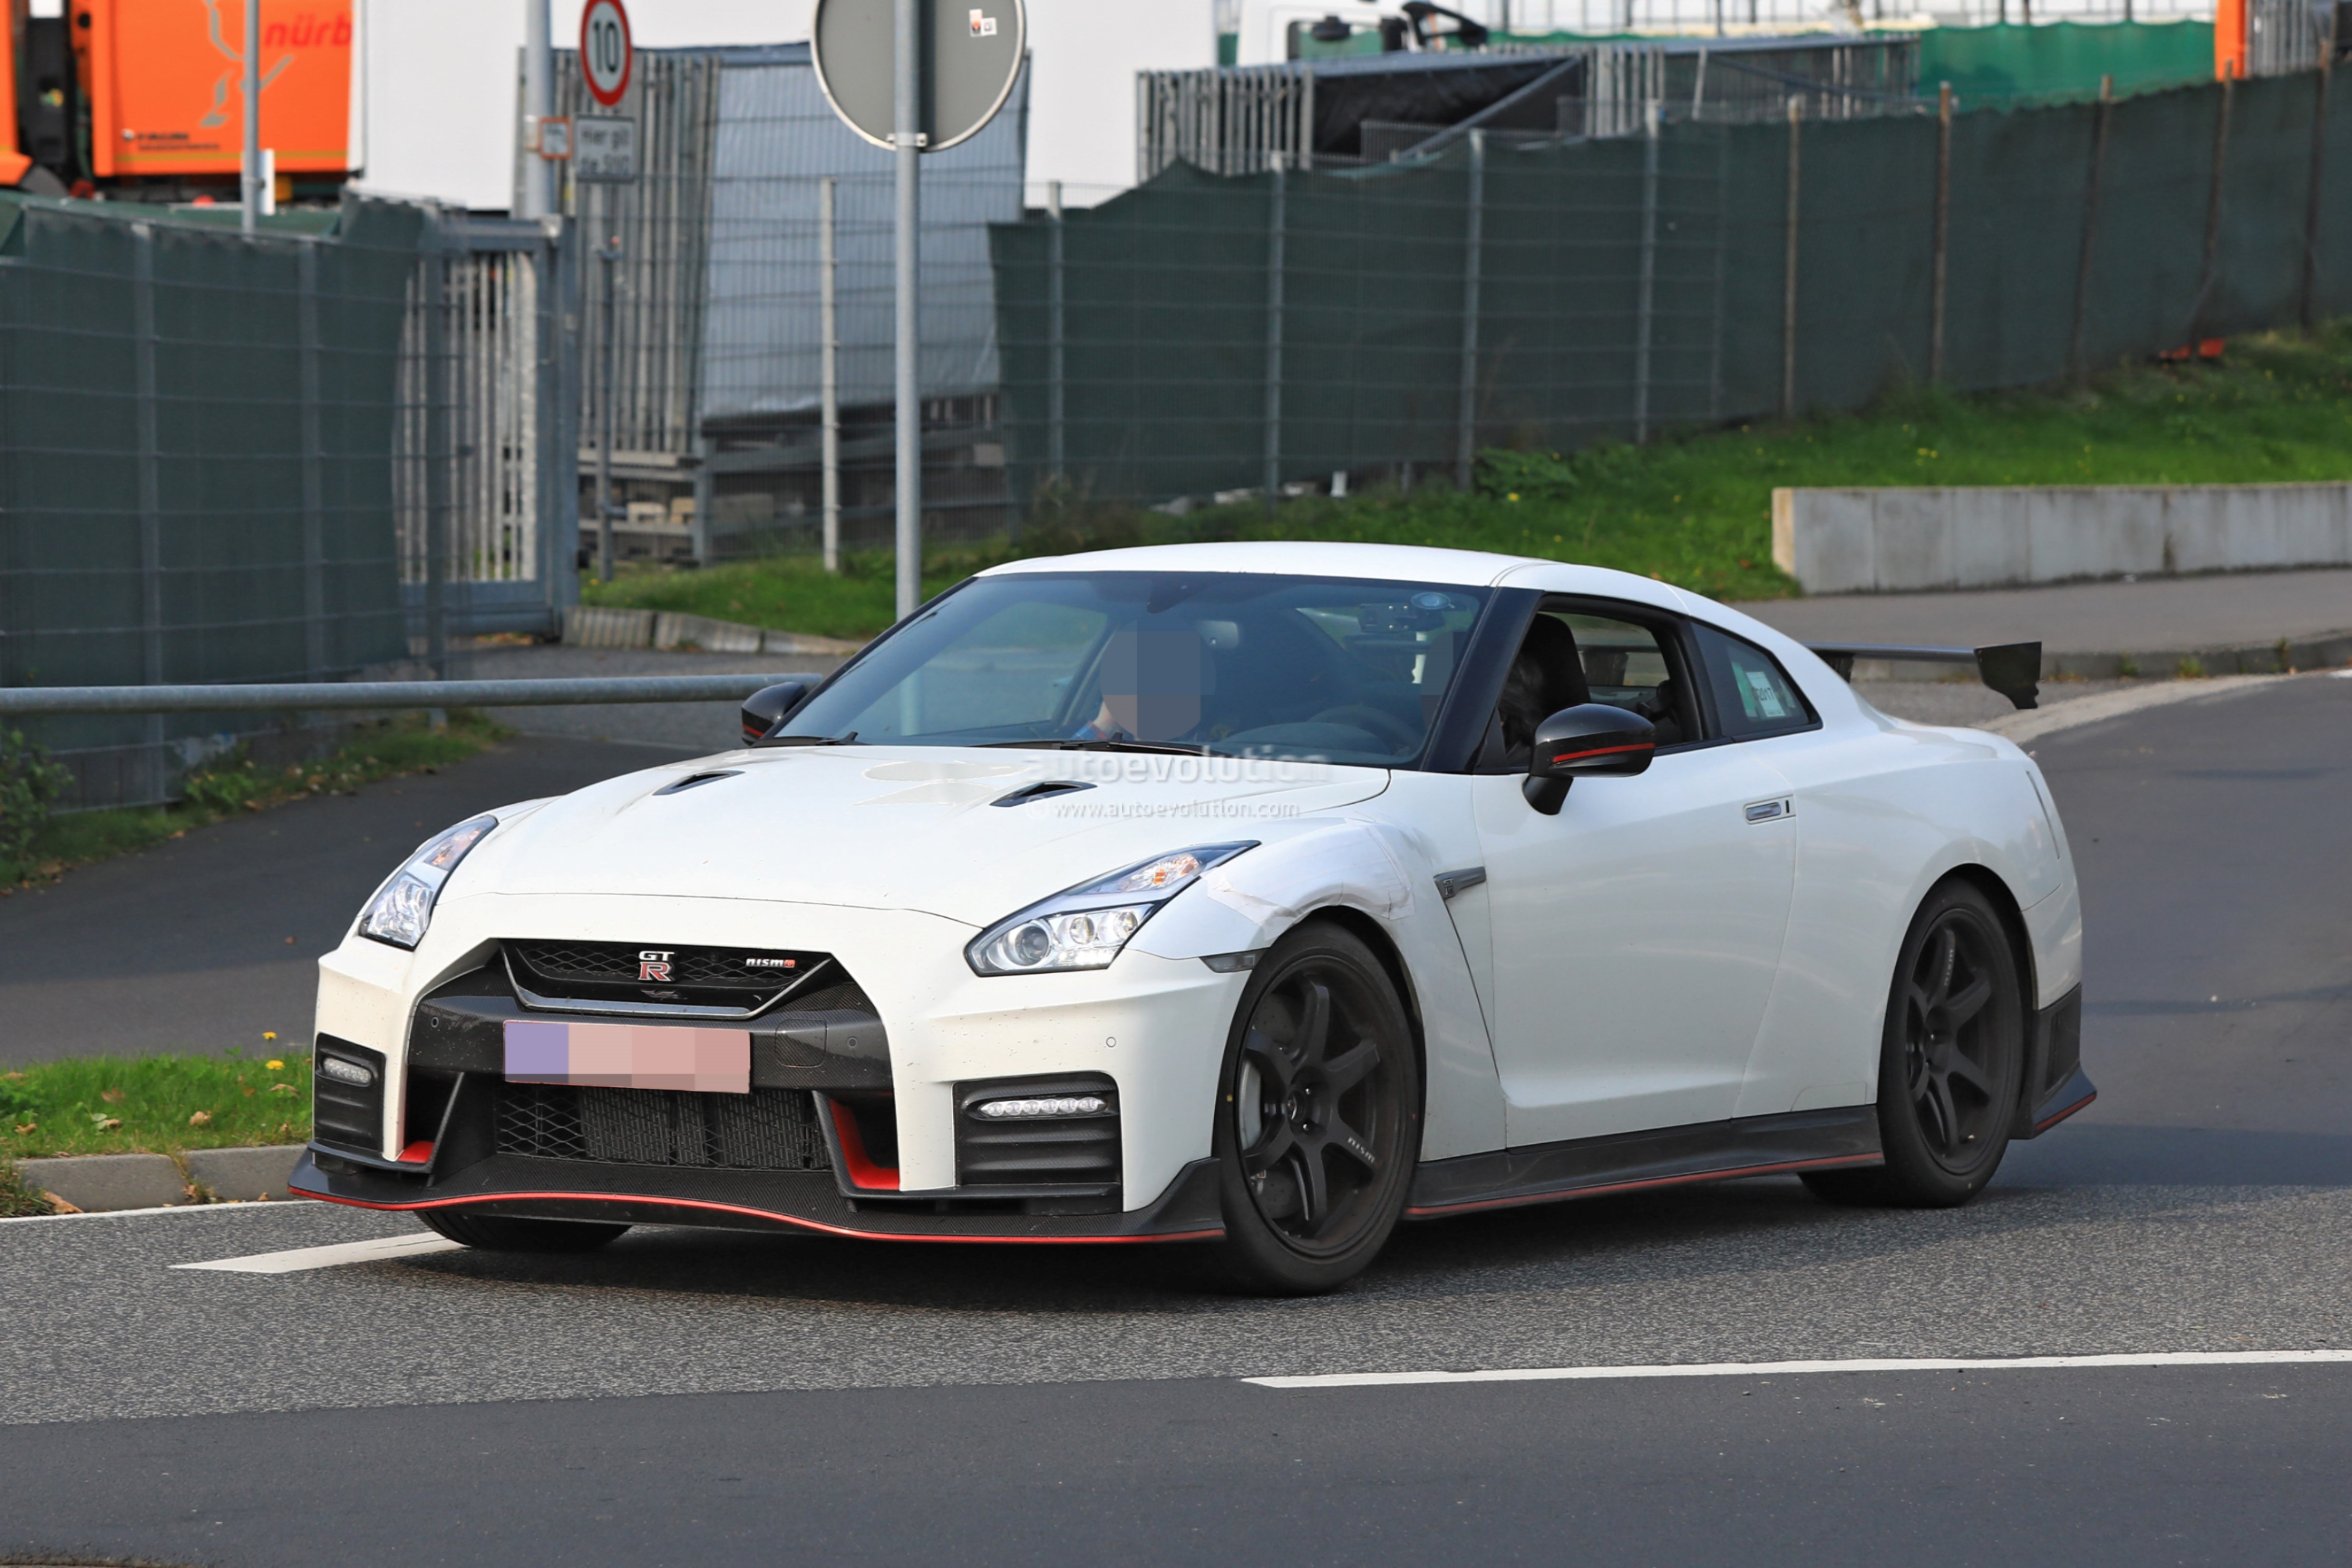 2018 Nissan Gt R Nismo Spied With Different Brakes And Camouflaged